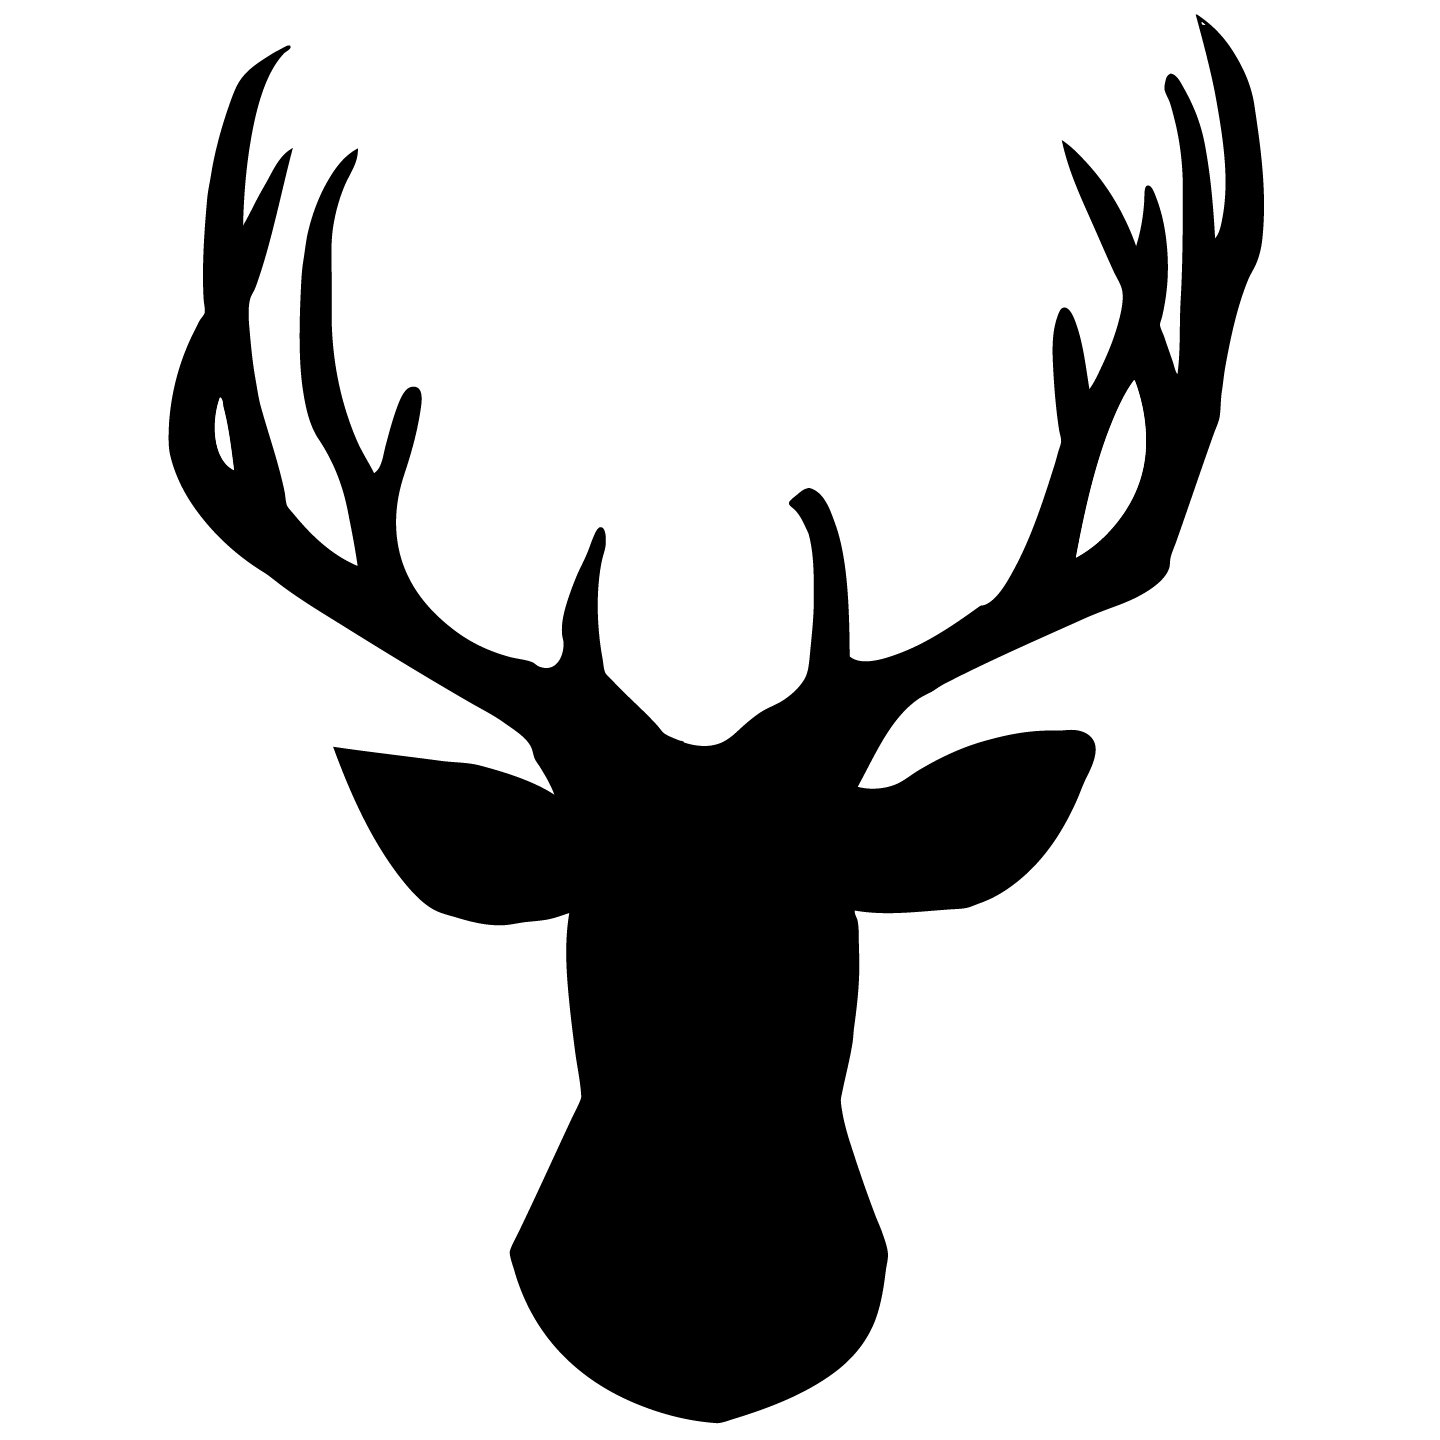 Deer antlers clipart black and white 